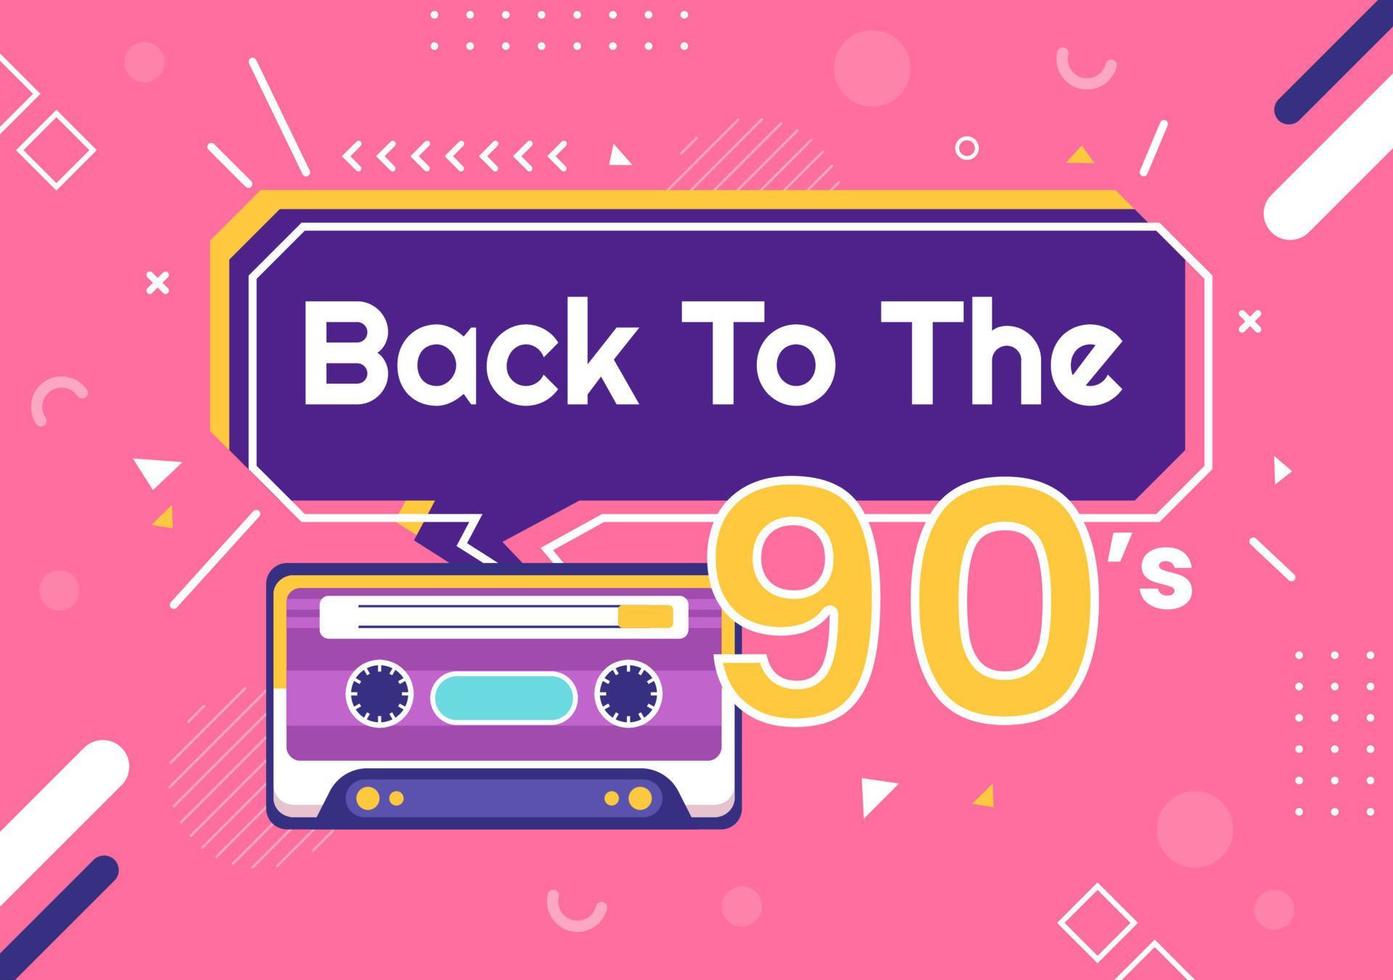 90s Retro Party Cartoon Background Illustration with Nineties Music, Sneakers, Radio, Dance Time and Tape Cassette in Trendy Flat Style Design vector